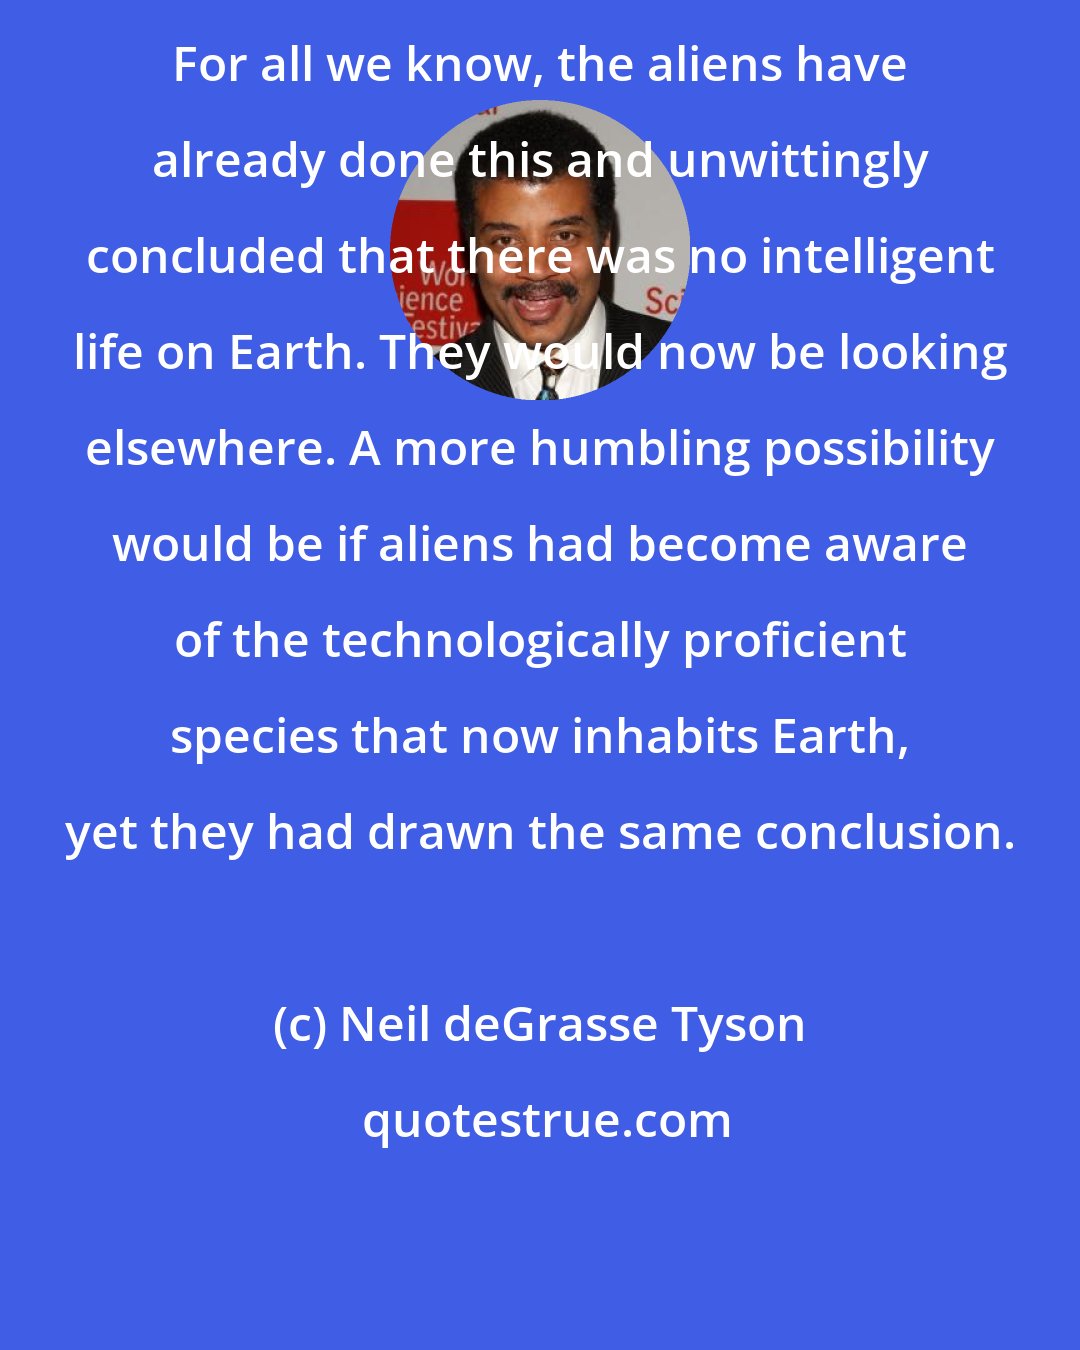 Neil deGrasse Tyson: For all we know, the aliens have already done this and unwittingly concluded that there was no intelligent life on Earth. They would now be looking elsewhere. A more humbling possibility would be if aliens had become aware of the technologically proficient species that now inhabits Earth, yet they had drawn the same conclusion.